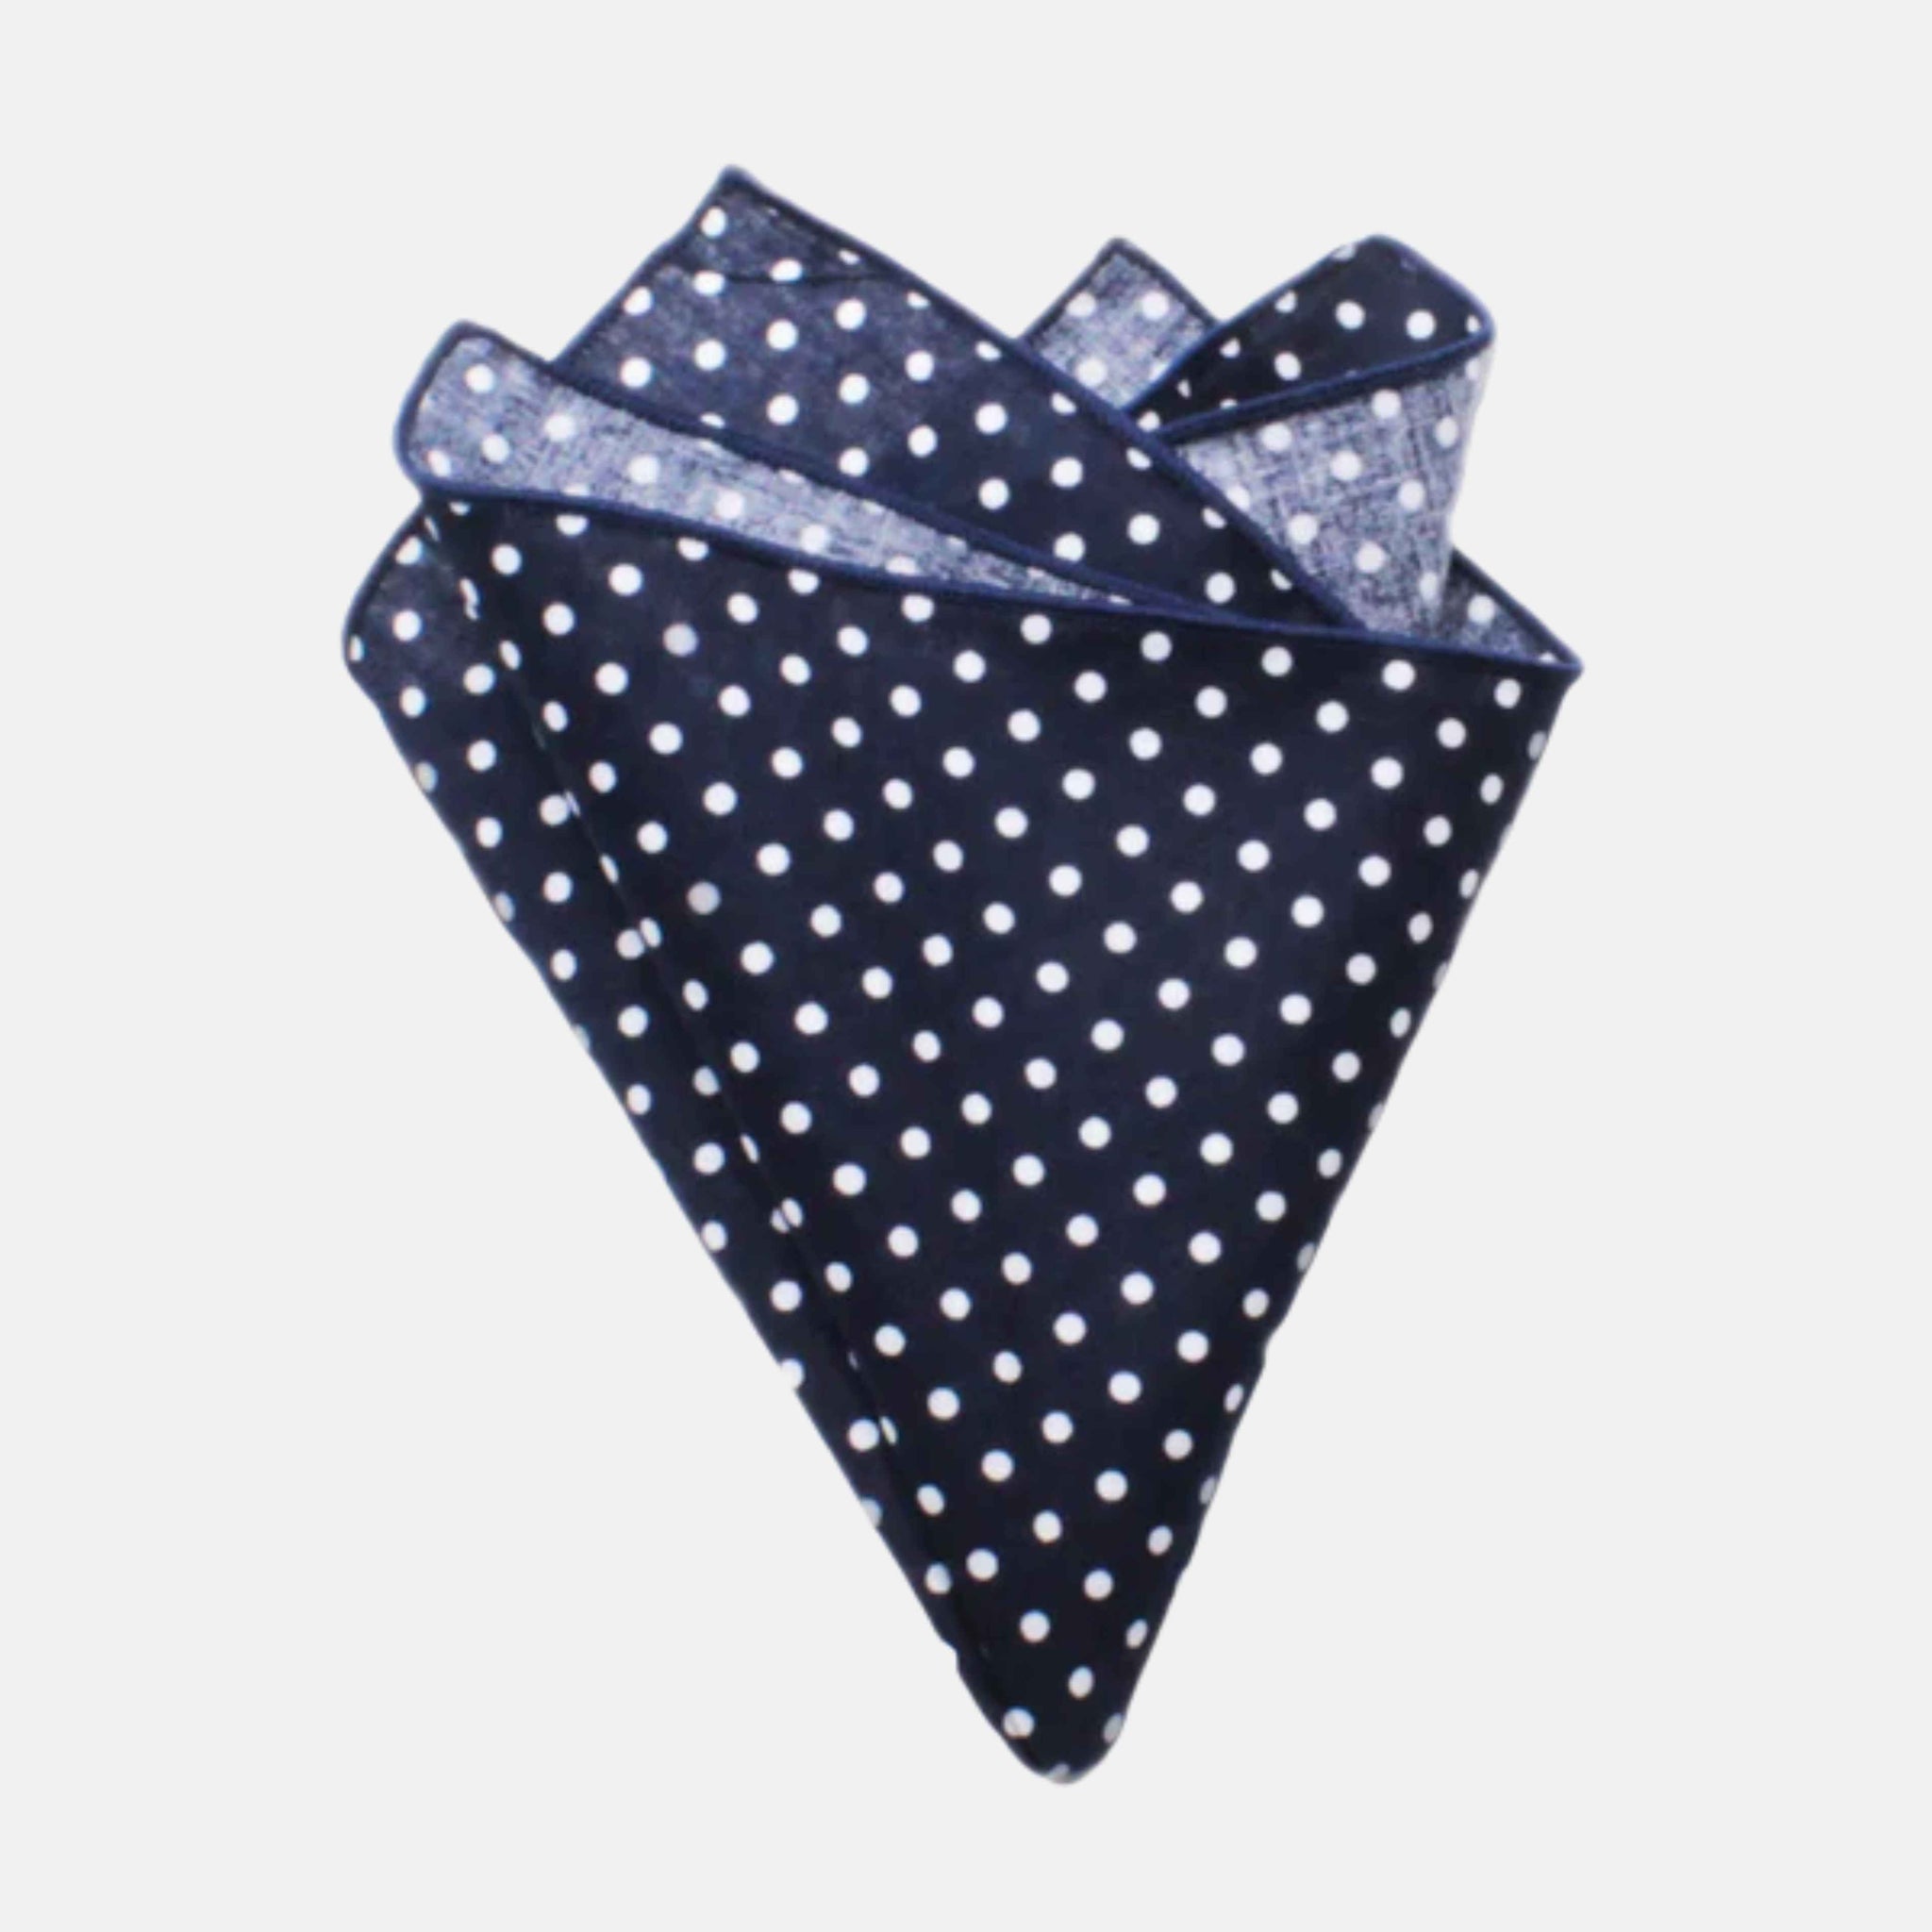 Blue pocket square with small and large polka dots